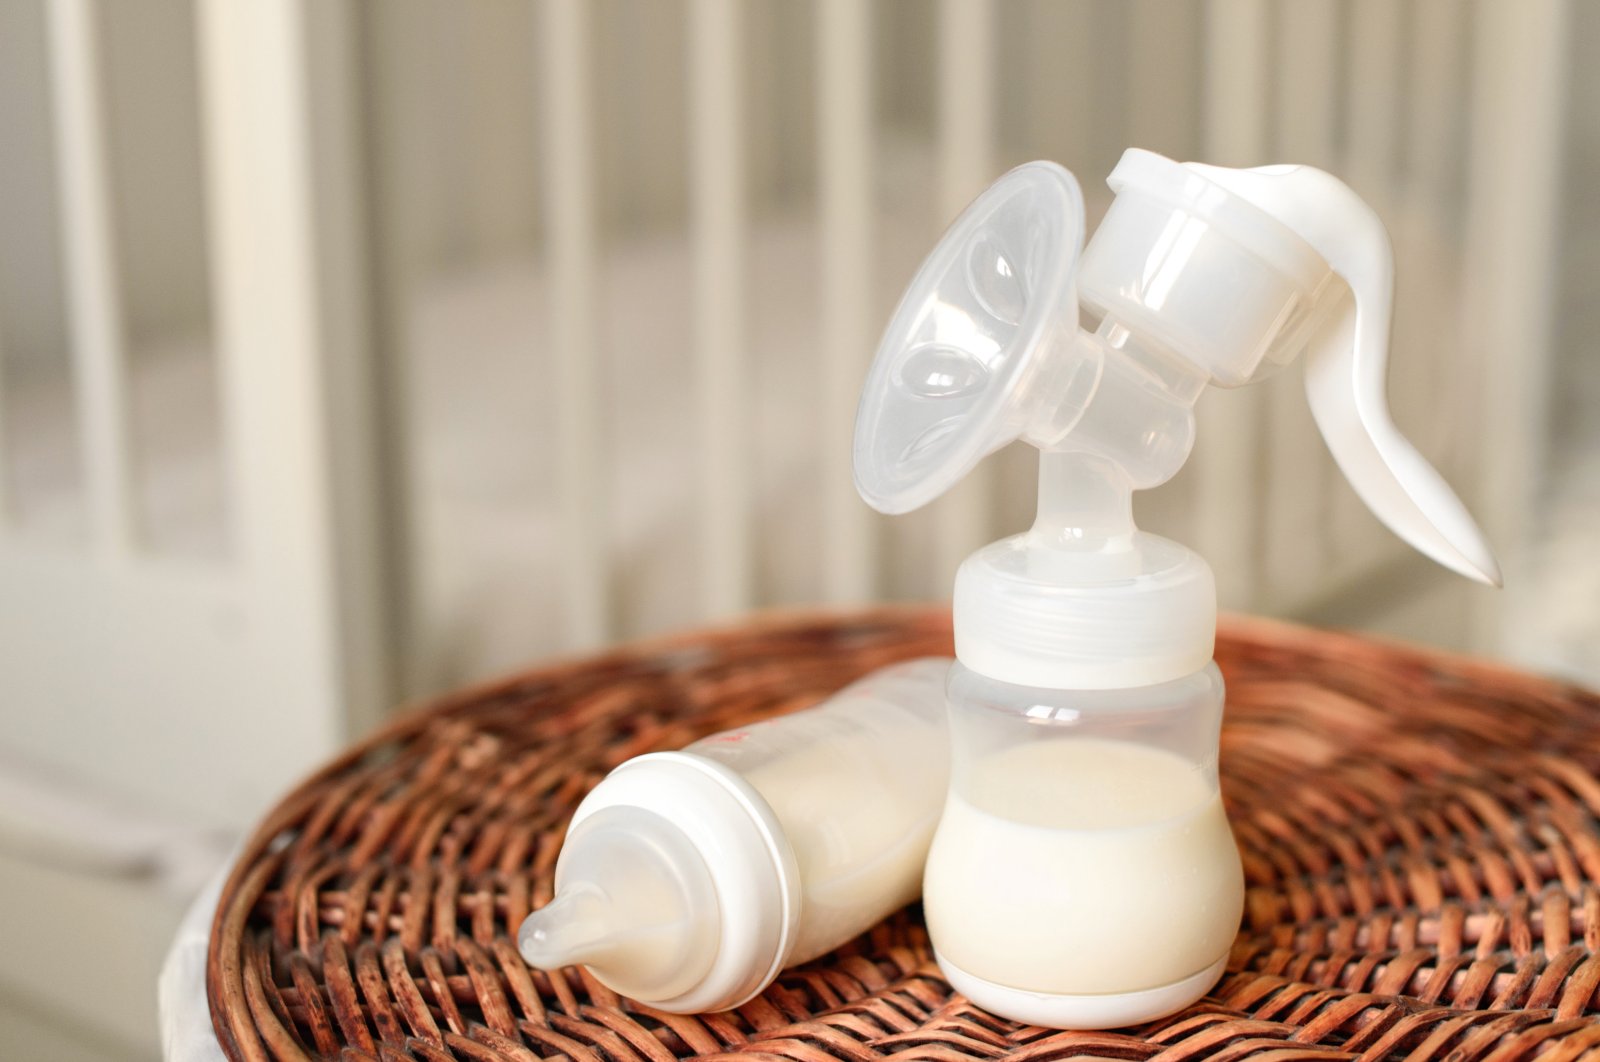 A breast pump and bottle with milk for baby stand on a straw basket. (Getty Images)